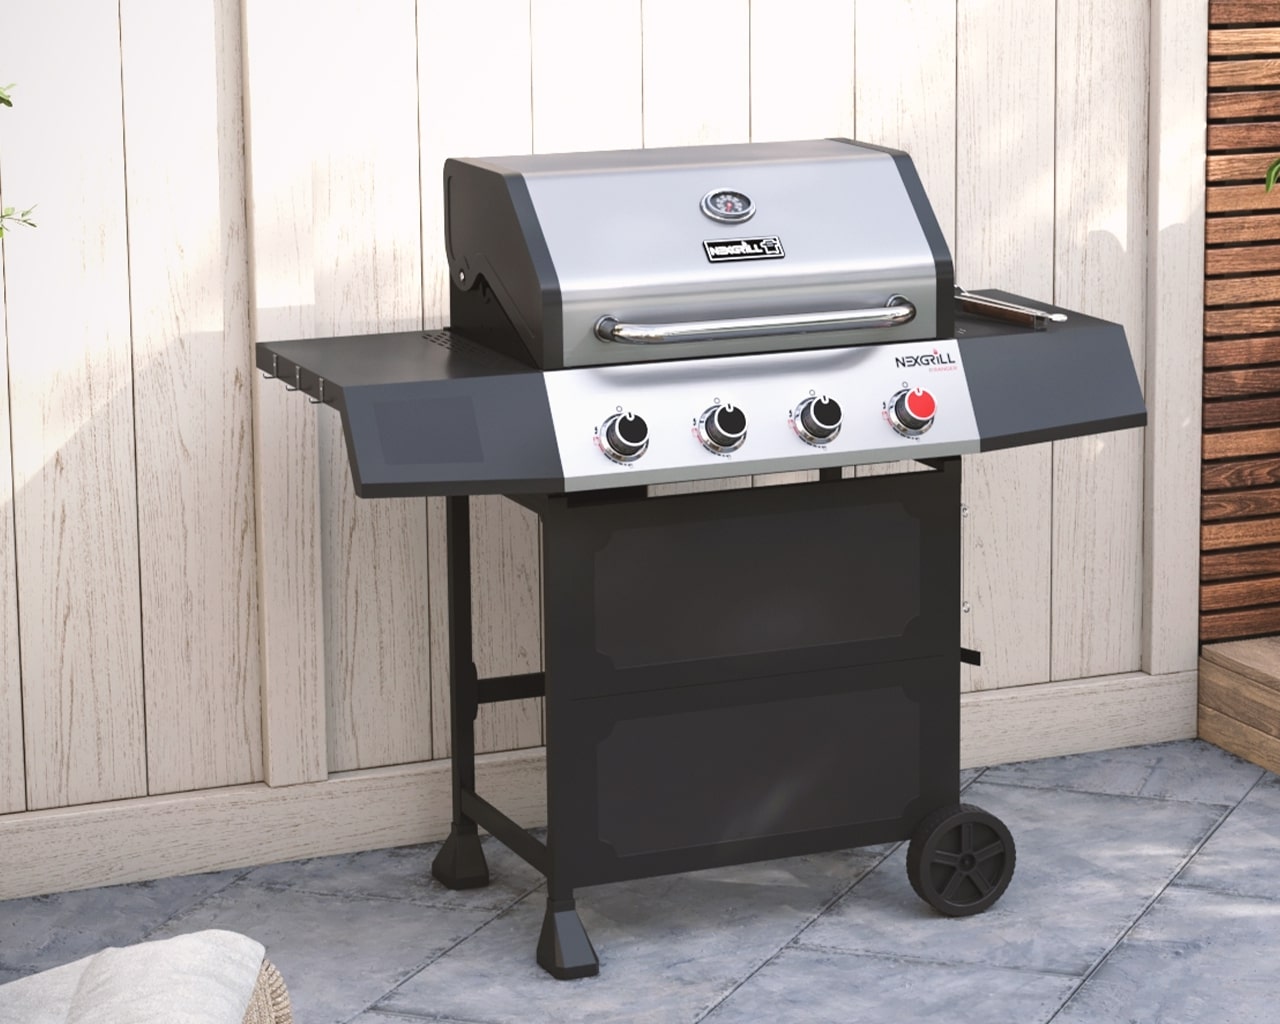 Nexgrill Ranger 4 Burner BBQ with Sear Zone, , hi-res image number null